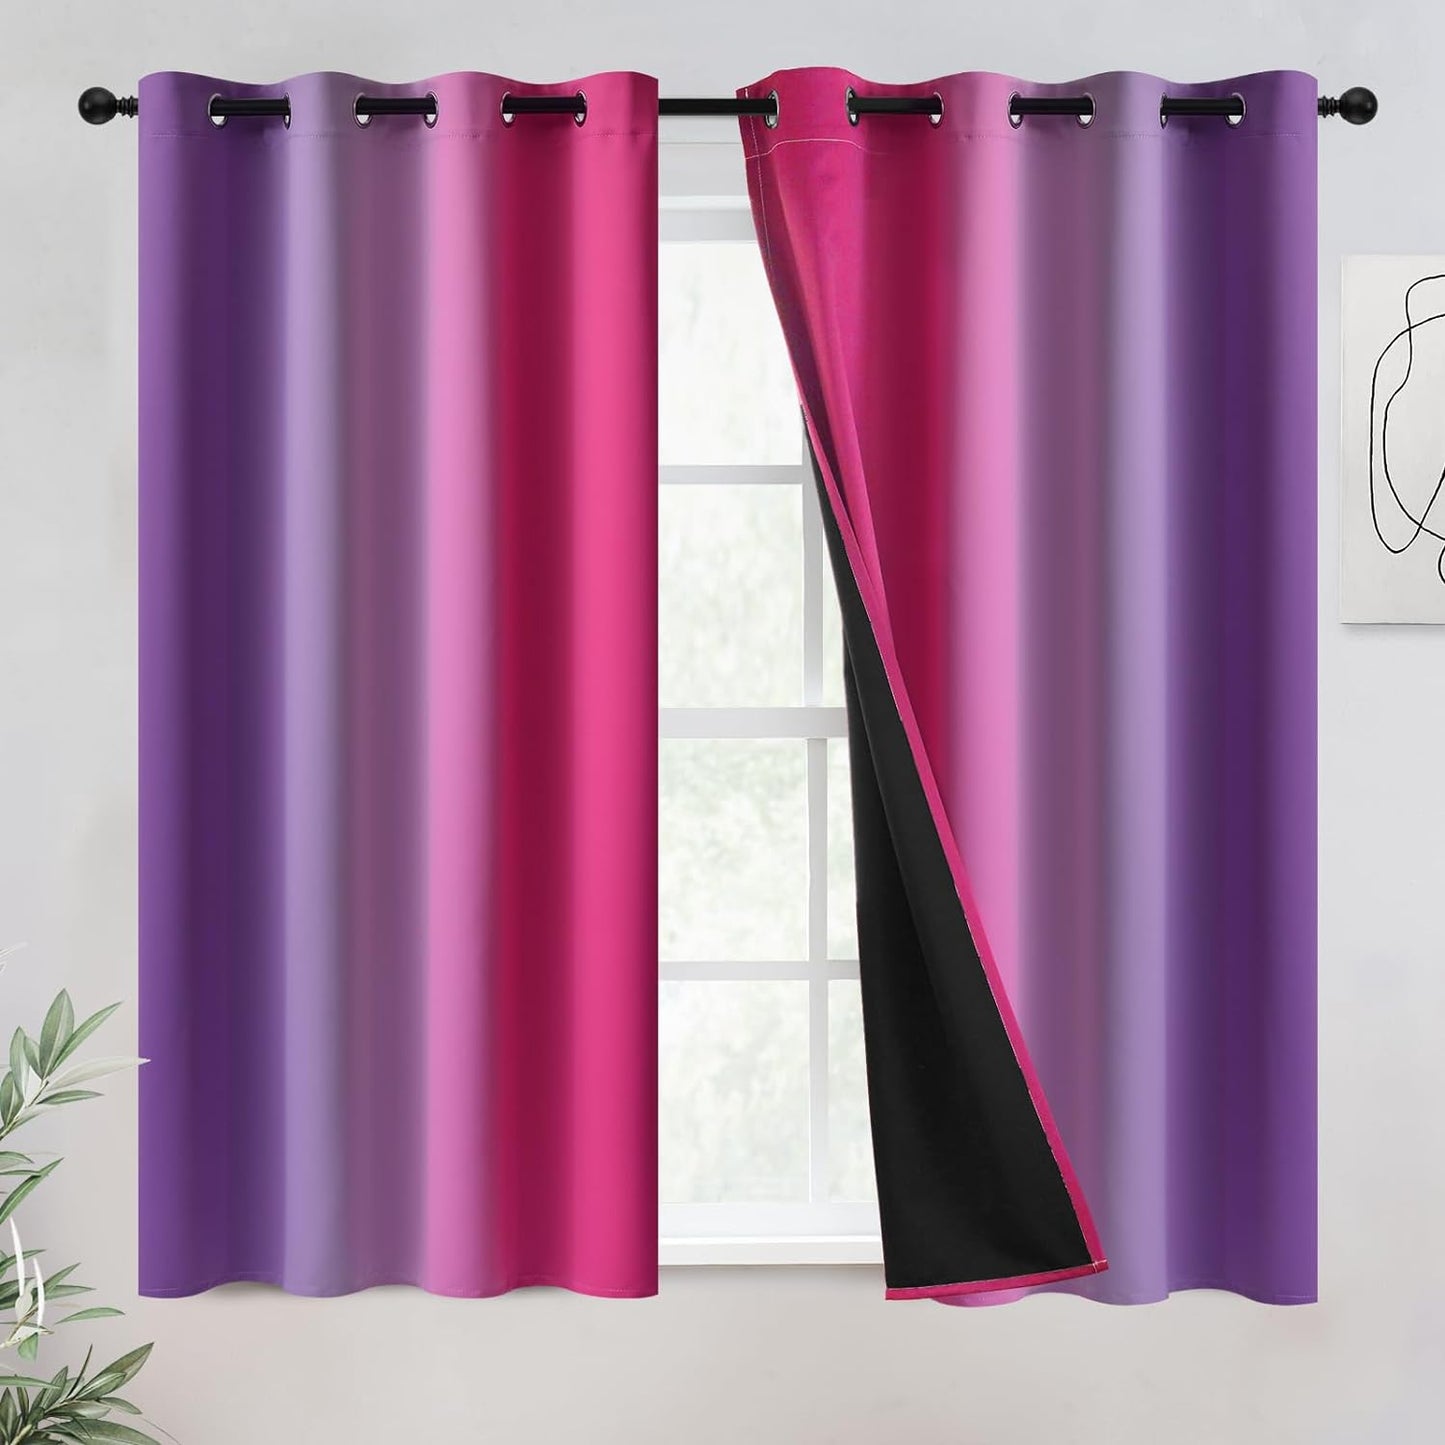 COSVIYA 100% Blackout Curtains & Drapes Ombre Purple Curtains 63 Inch Length 2 Panels,Full Room Darkening Grommet Gradient Insulated Thermal Window Curtains for Bedroom/Living Room,52X63 Inches  COSVIYA Blackout Pink And Purple 52W X 54L 